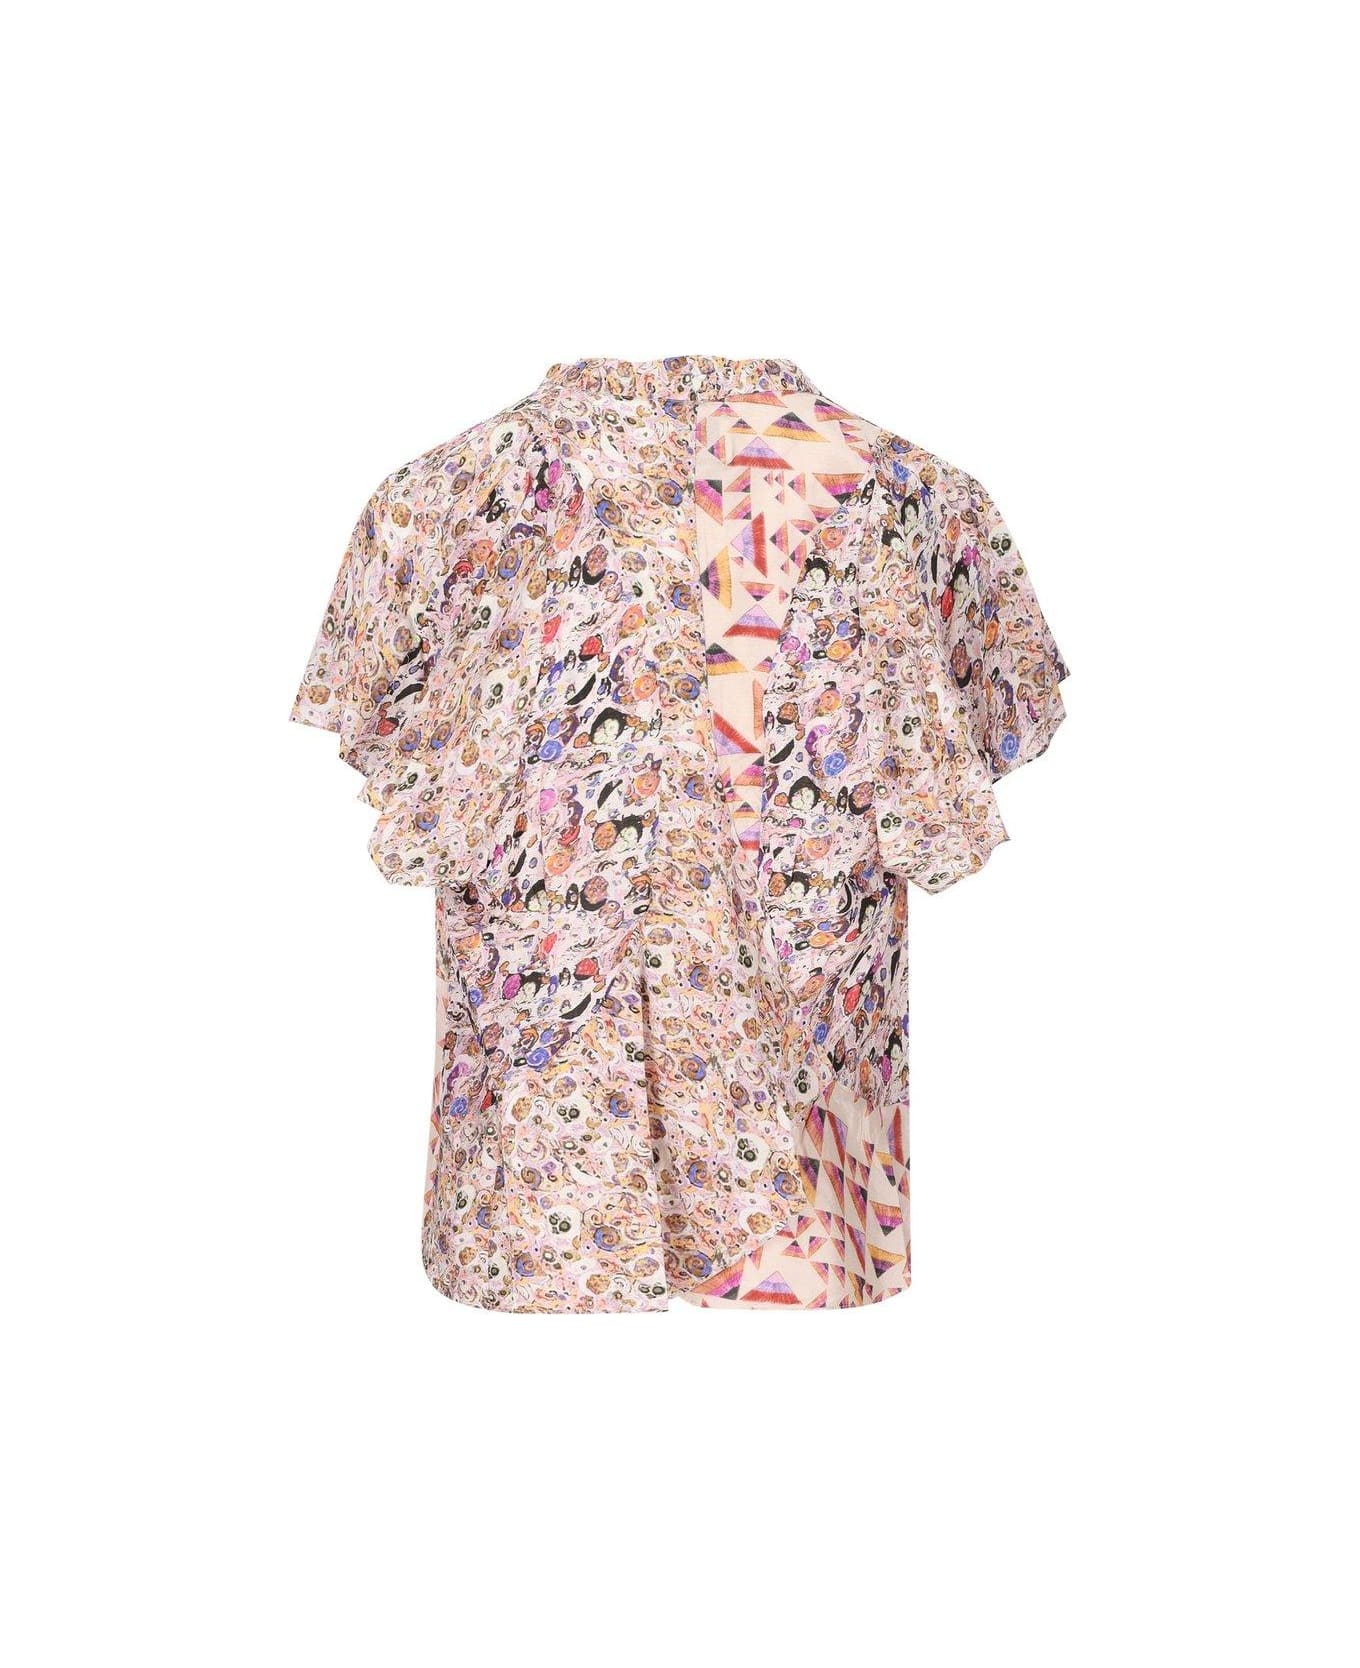 Isabel Marant All-over Print Shirts - Beige トップス